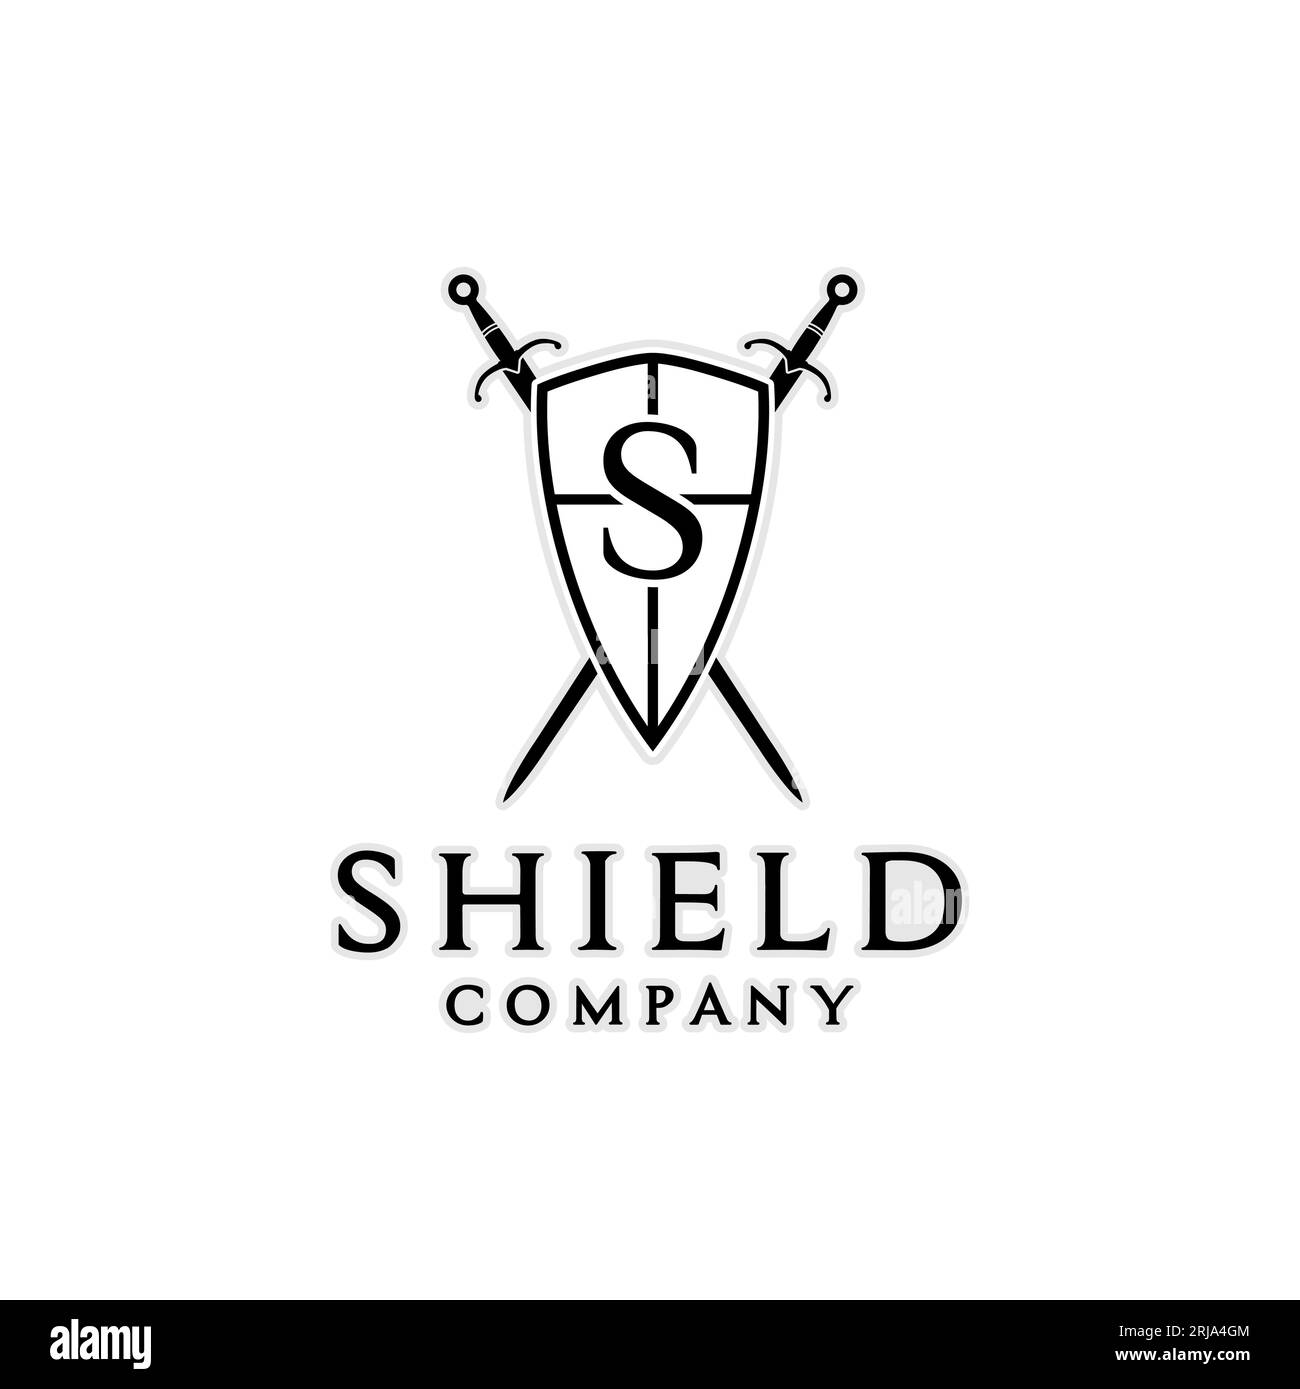 Knight Shield Armor Sword Initial Letter S For Company Logo Design Inspiration Stock Vector